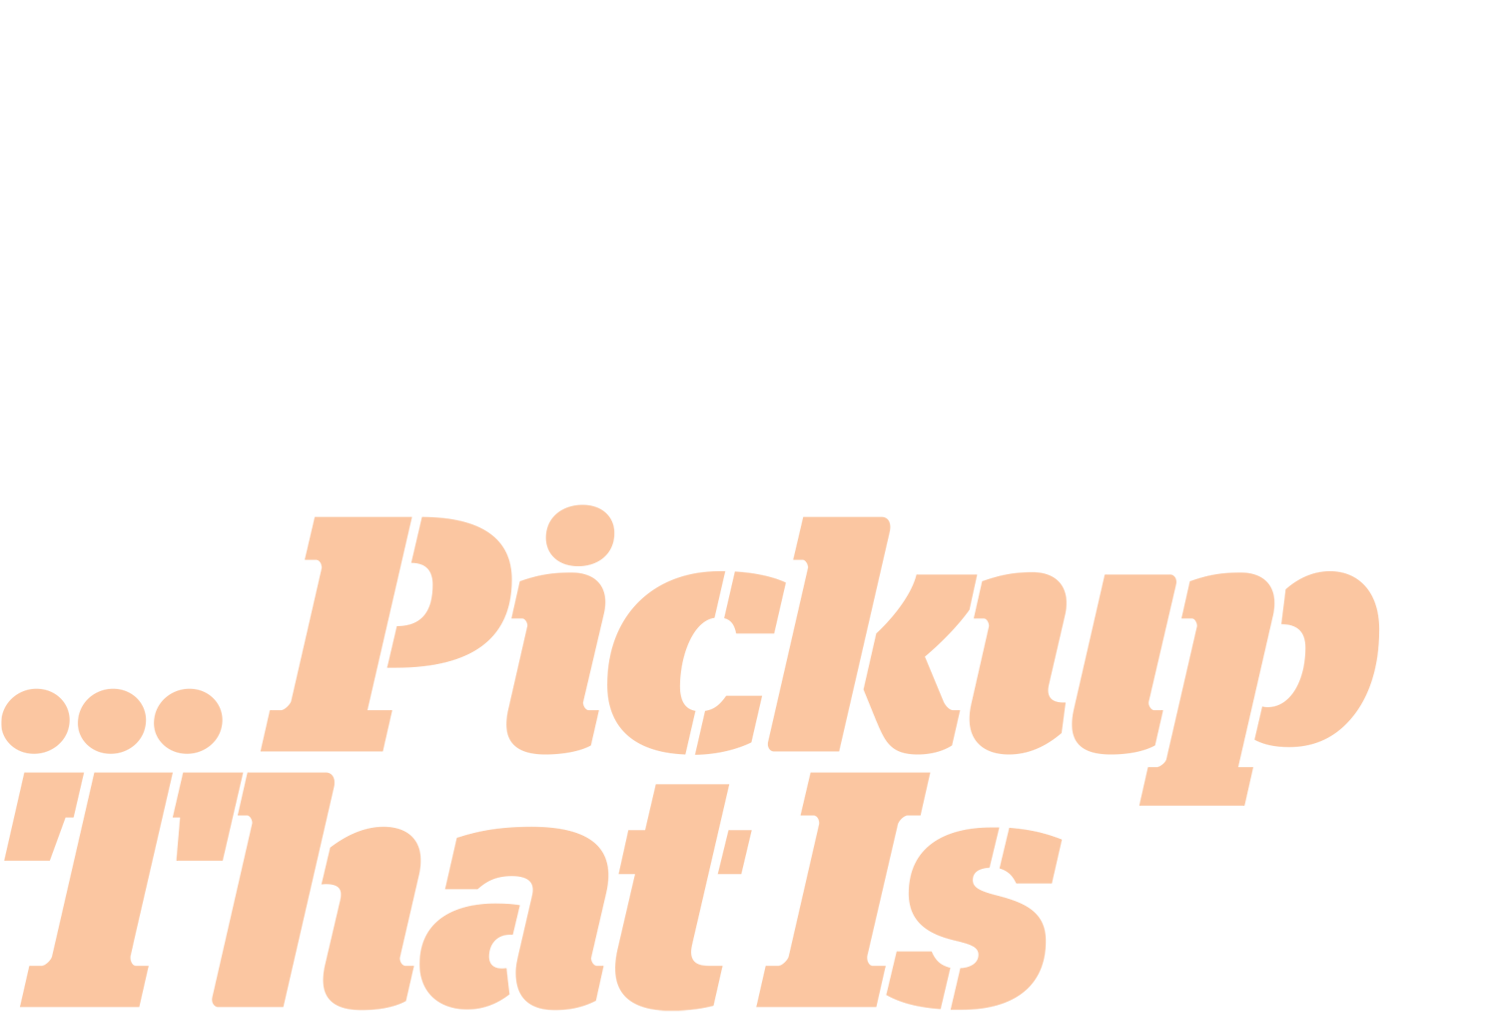 Hot Rod Lincoln ... Pickup That Is typography